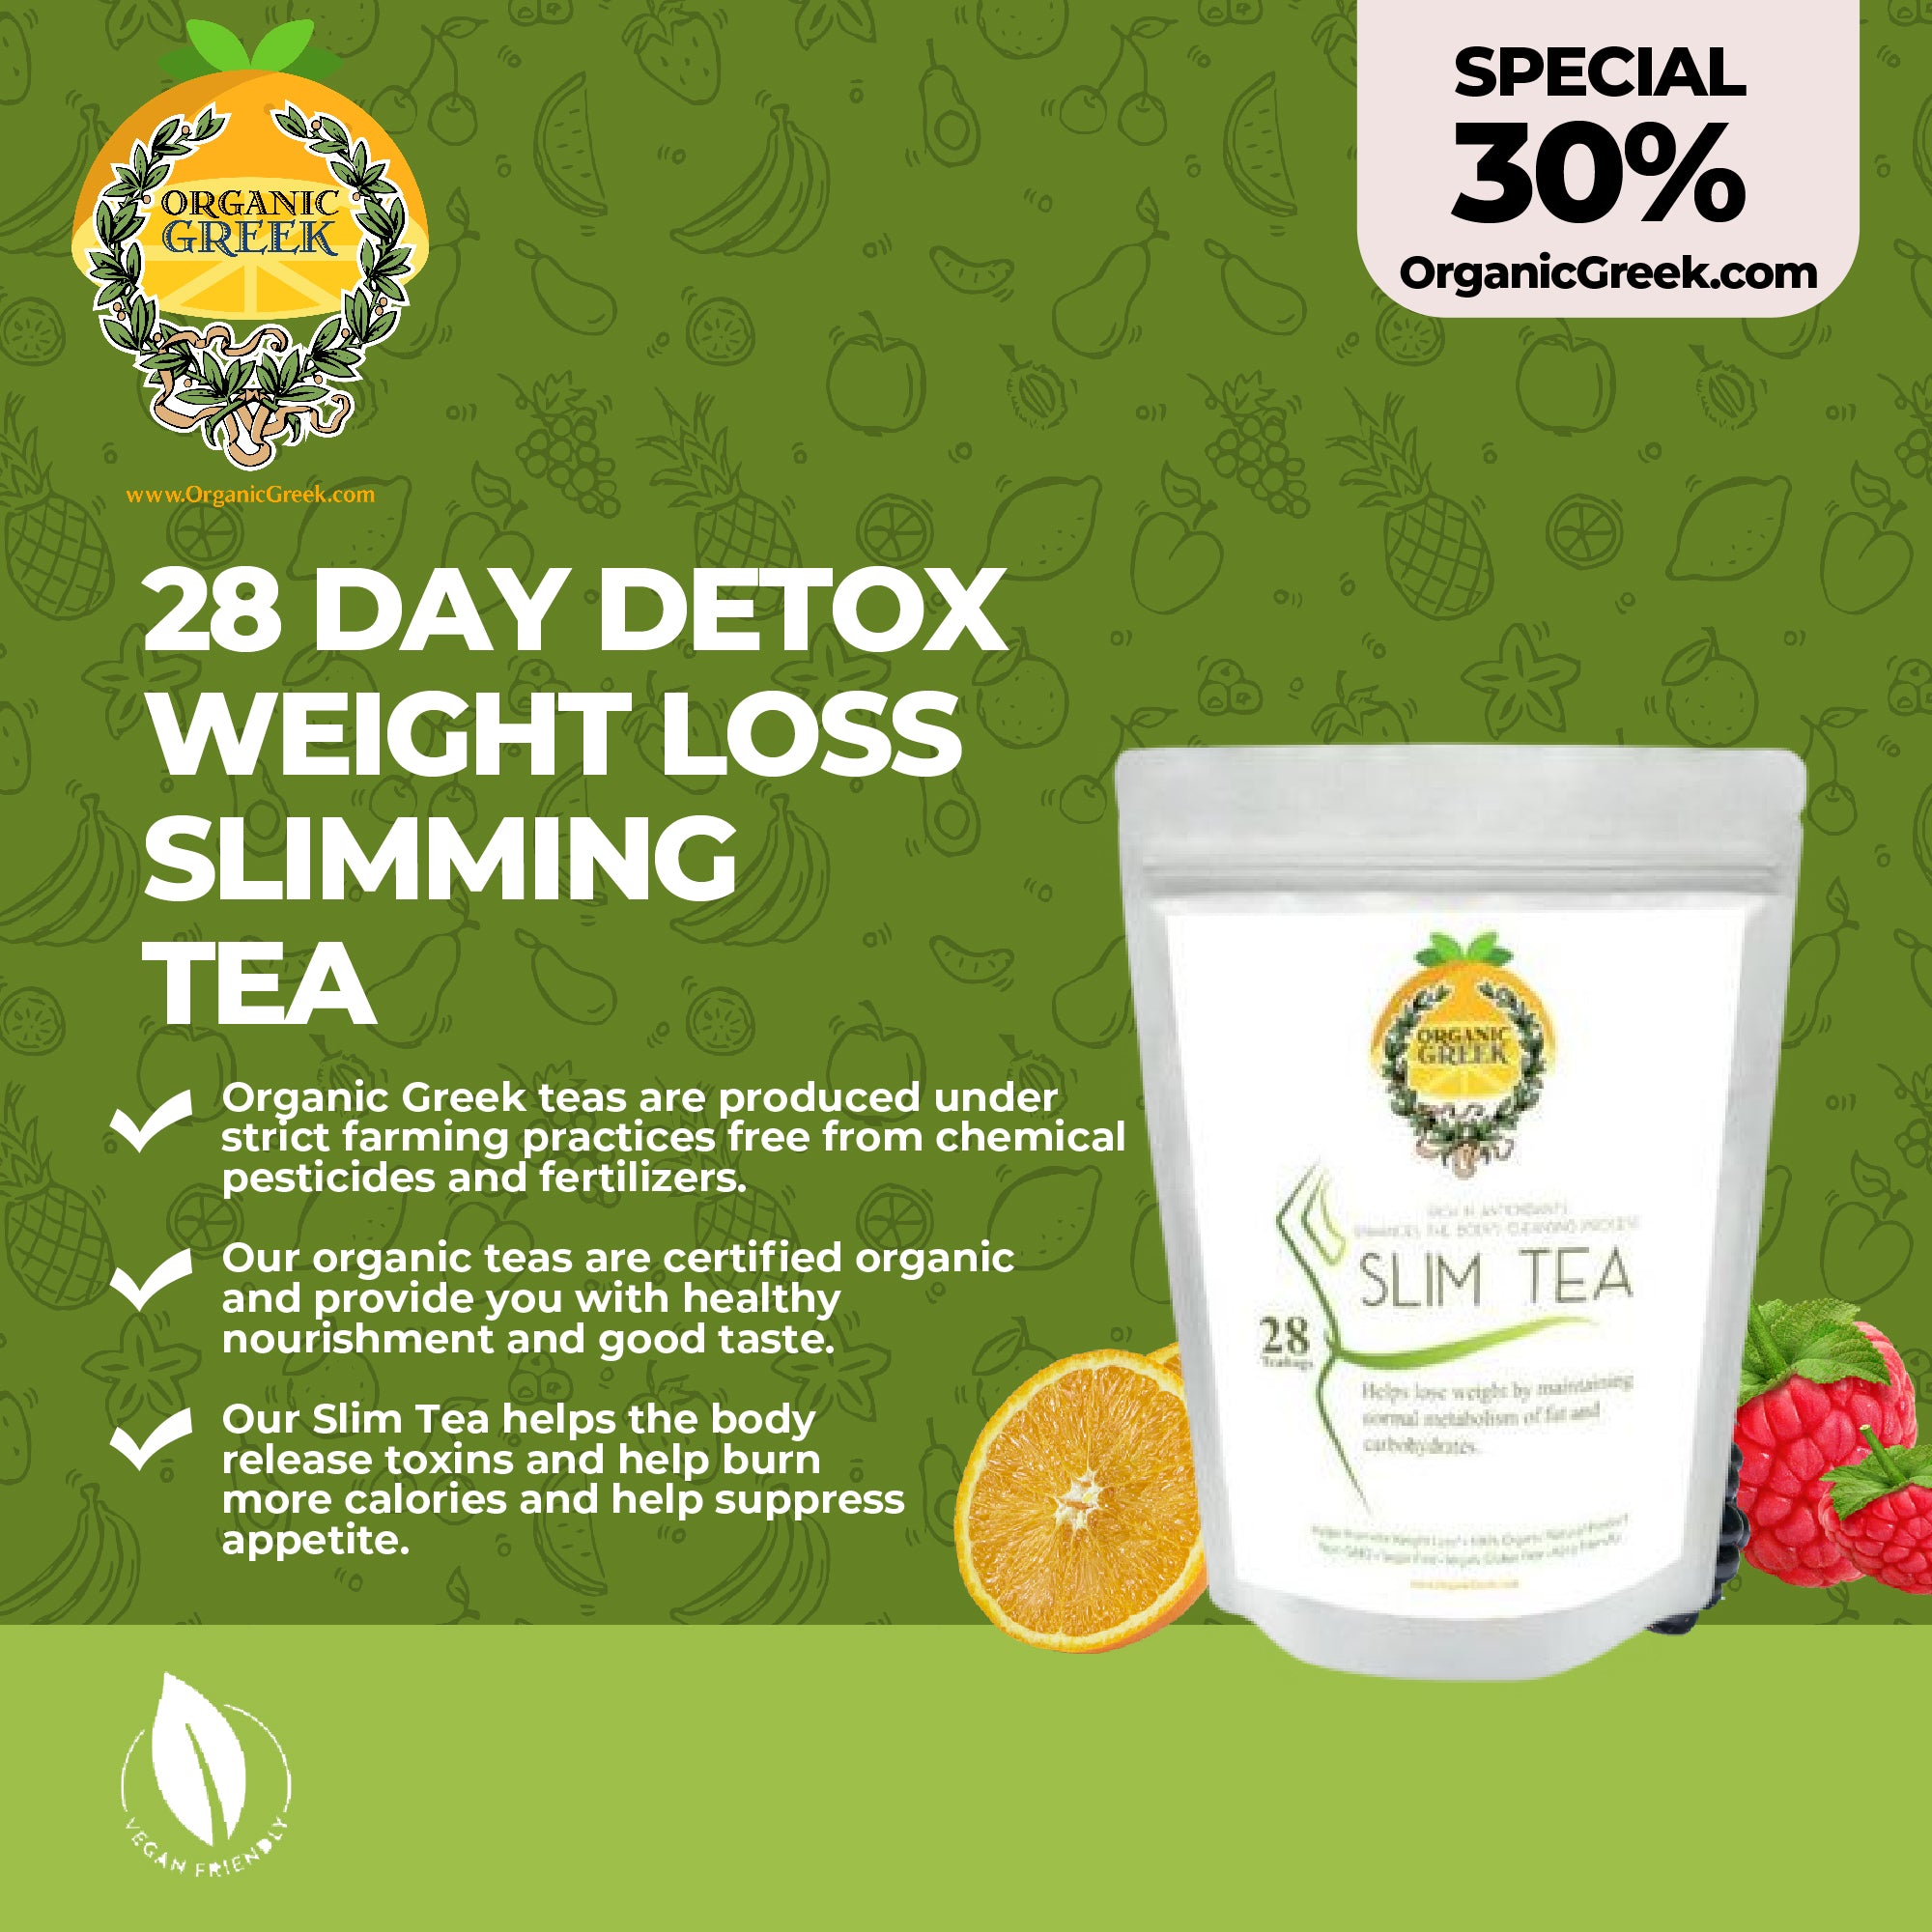 Green Tea Weight Loss - Lose Weight Naturally With the Best Slim Tea